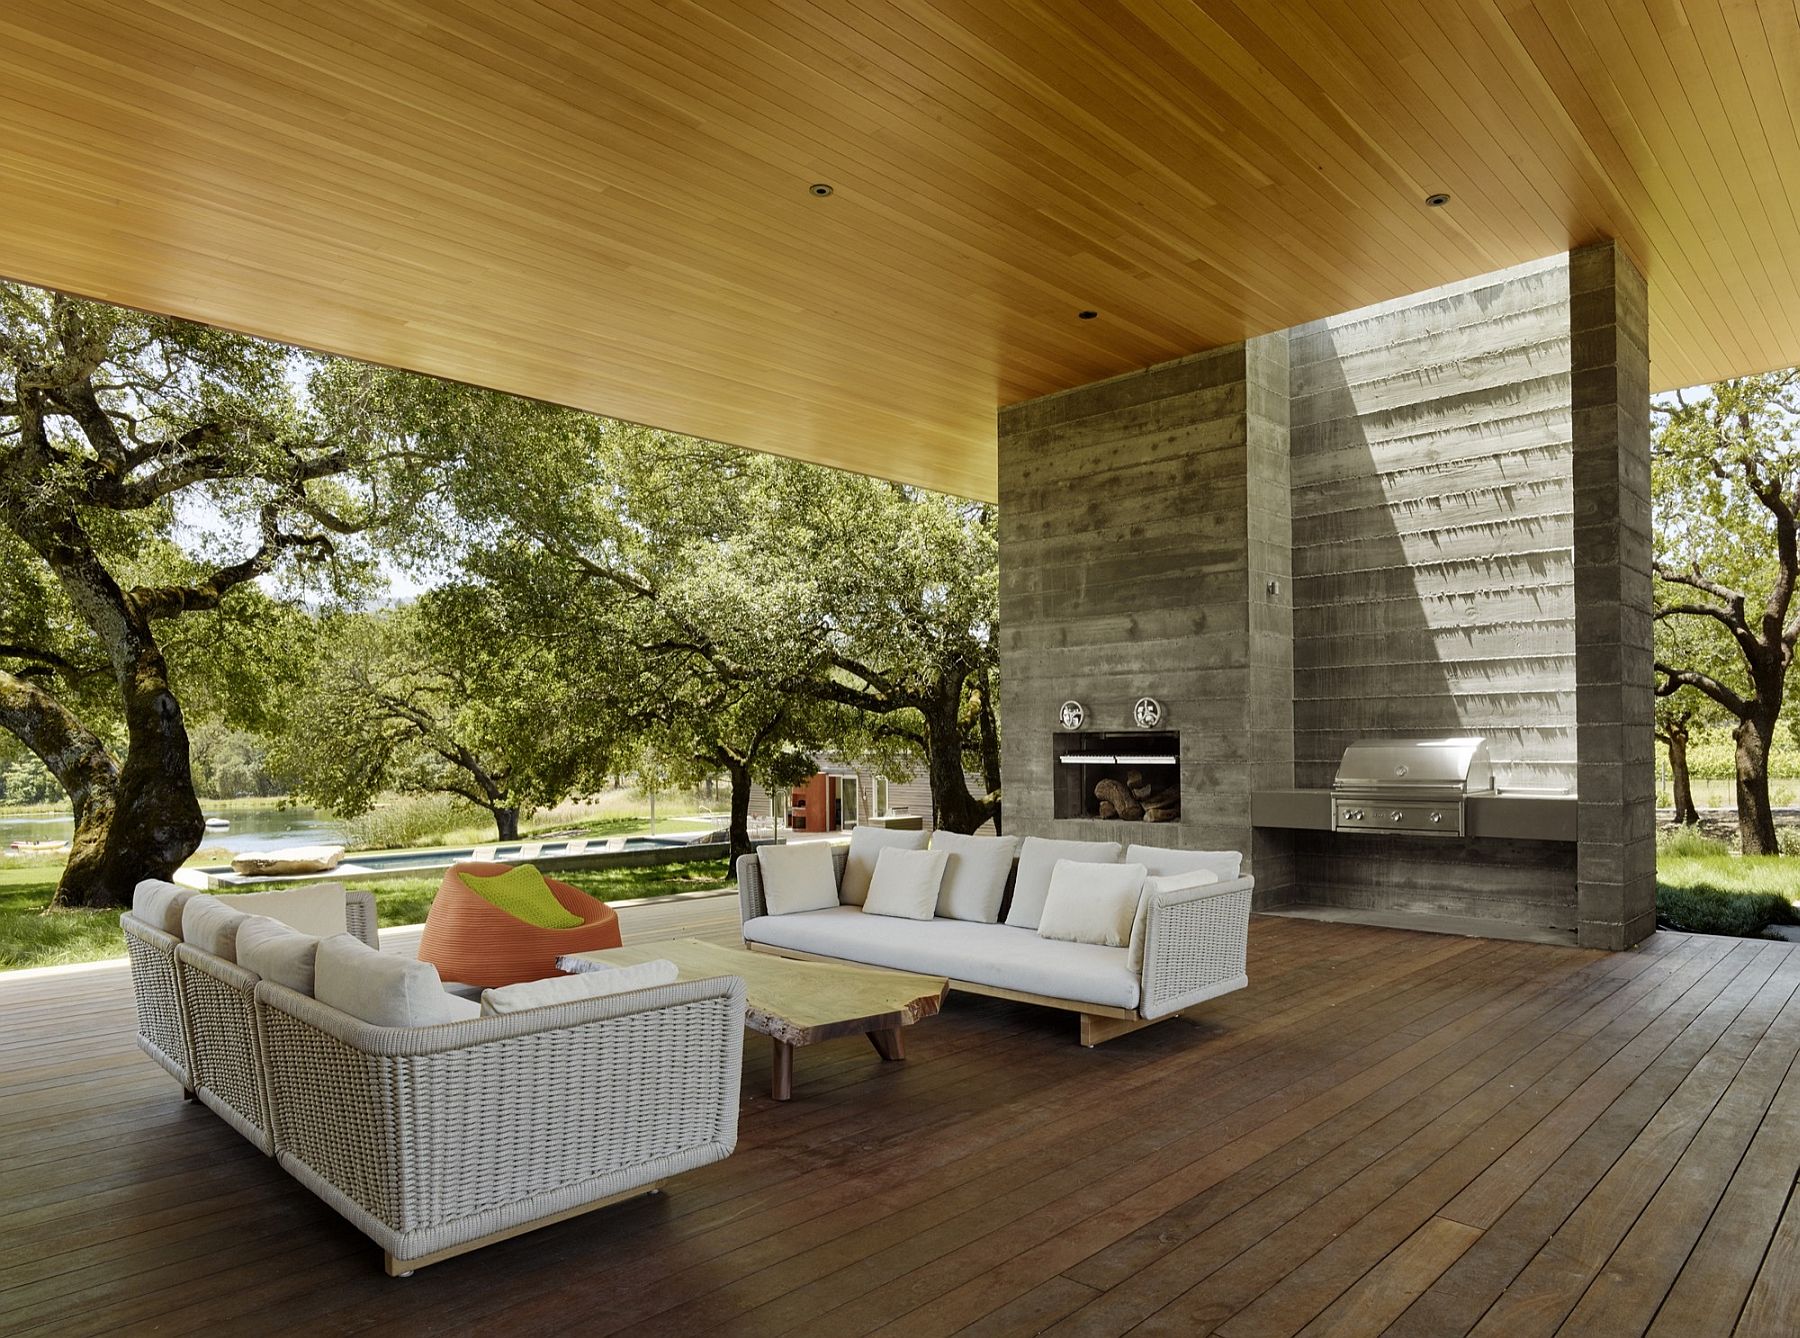 Open, outdoor living areas with shade overlook the natural pond and the greenery beyond